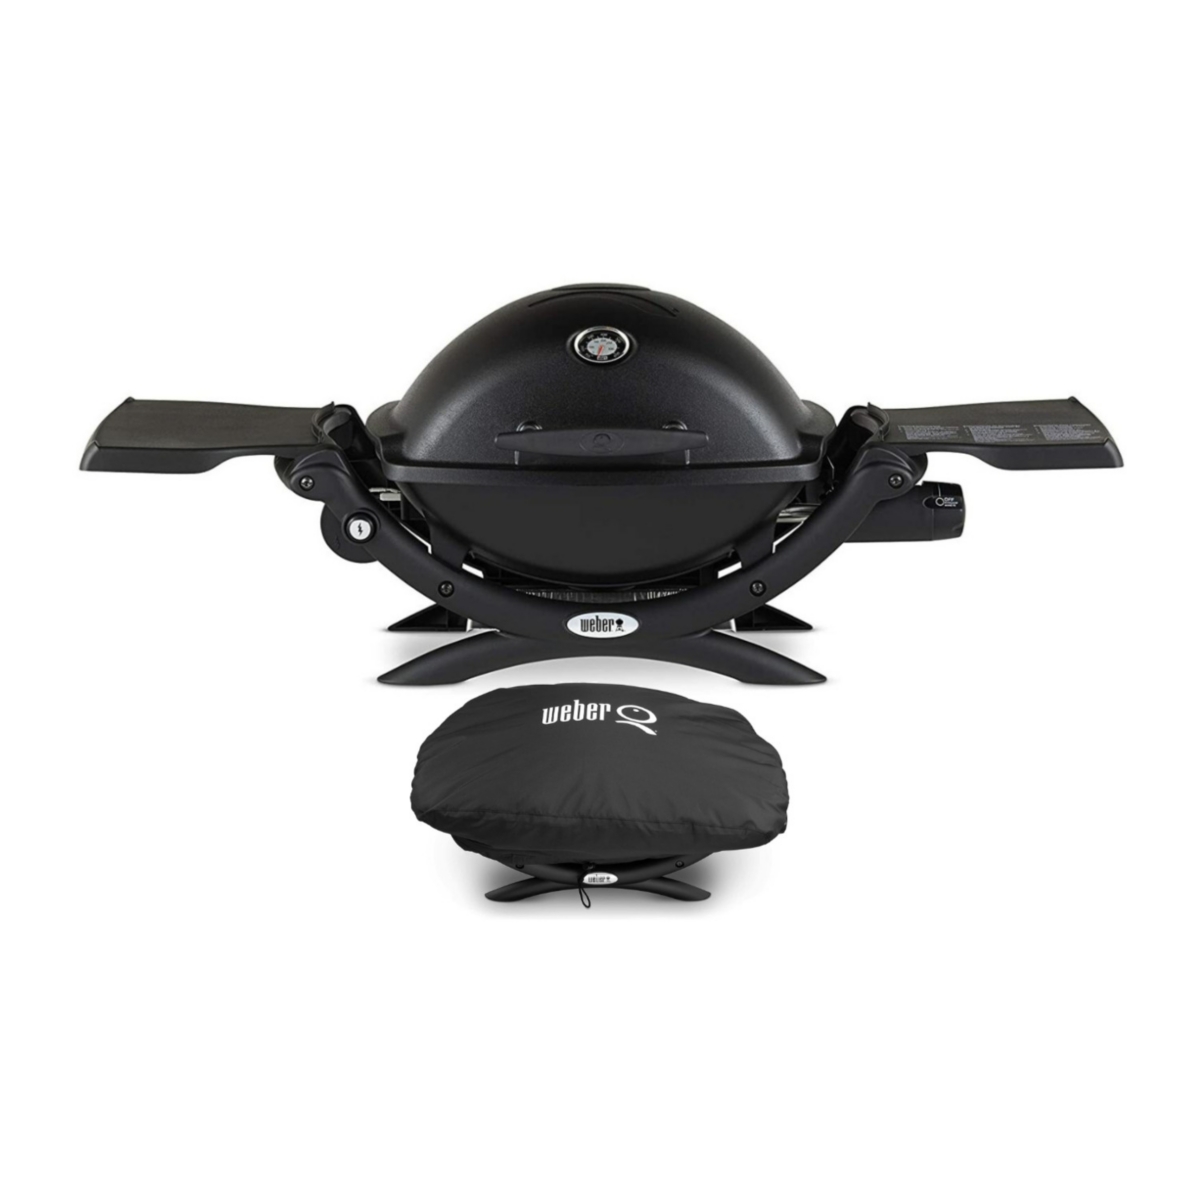 Q 1200 Gas Grill - Lp Gas (Black) With Grill Cover - Black